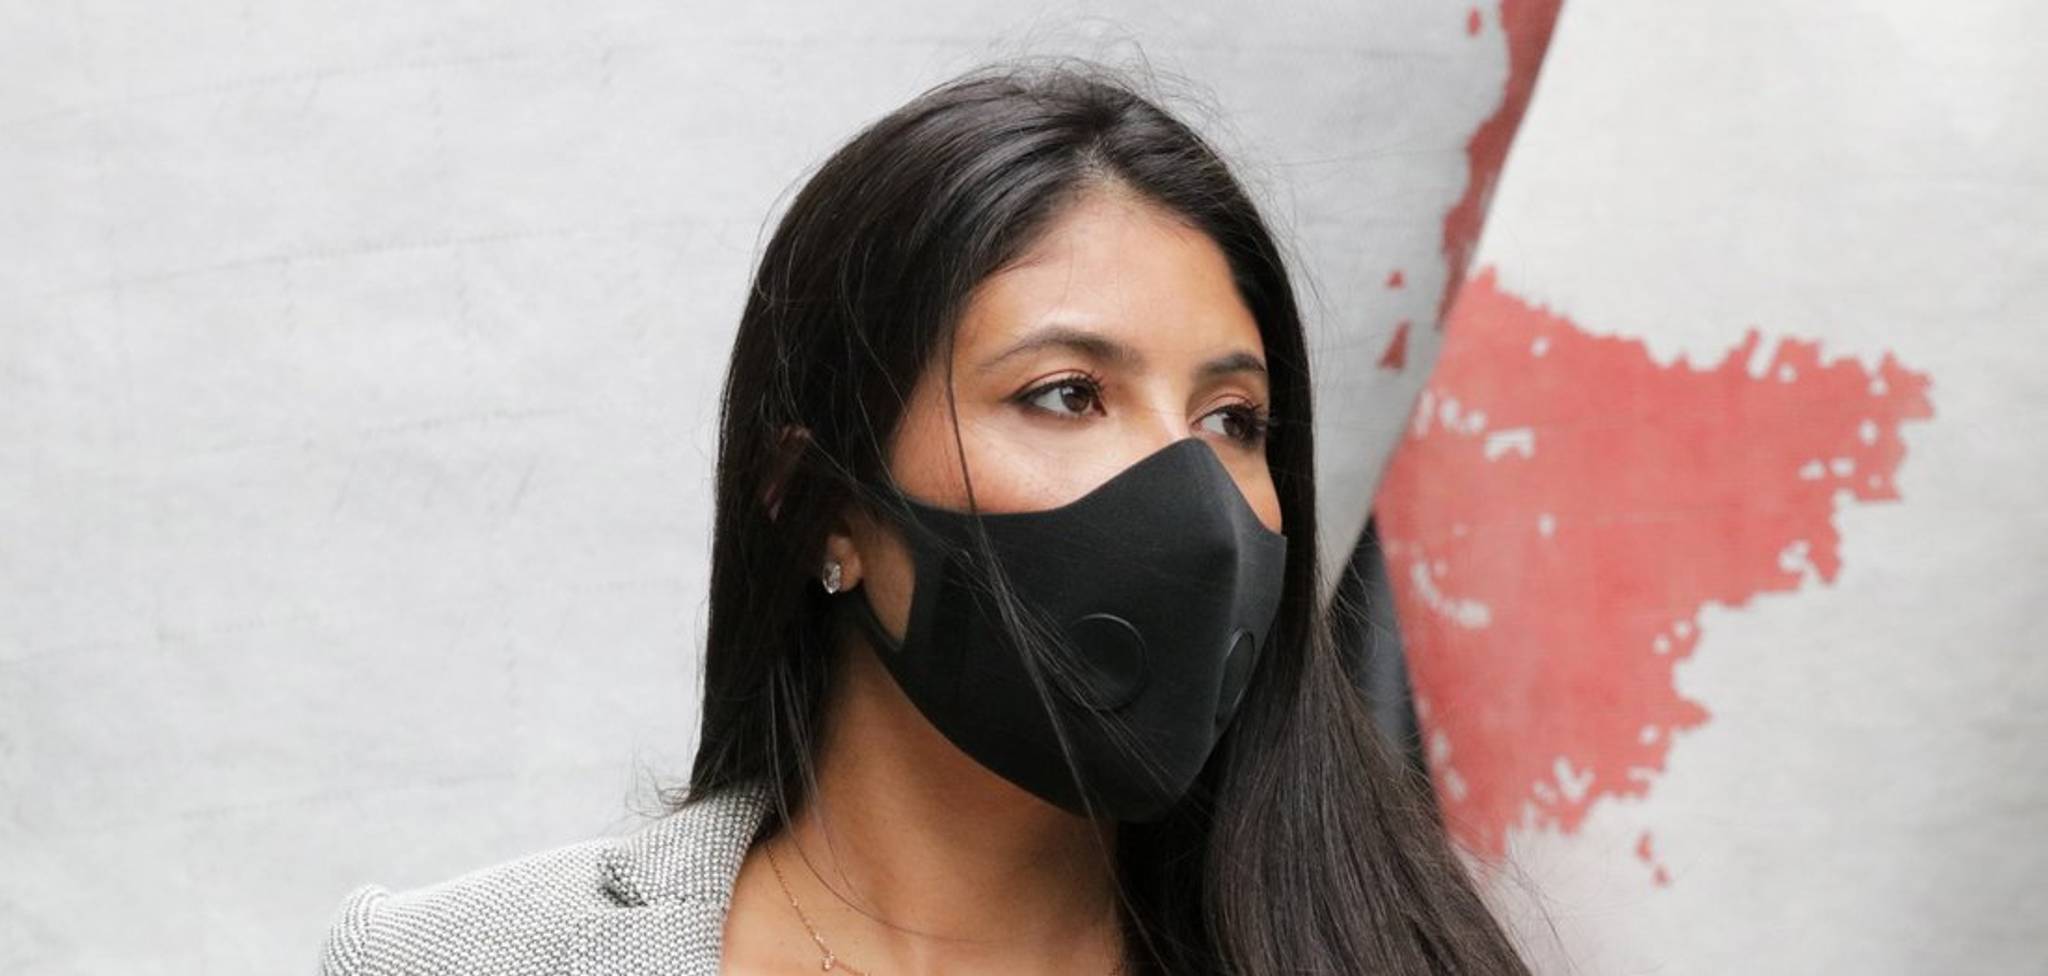 Aussies embrace pollution masks as stylish necessities